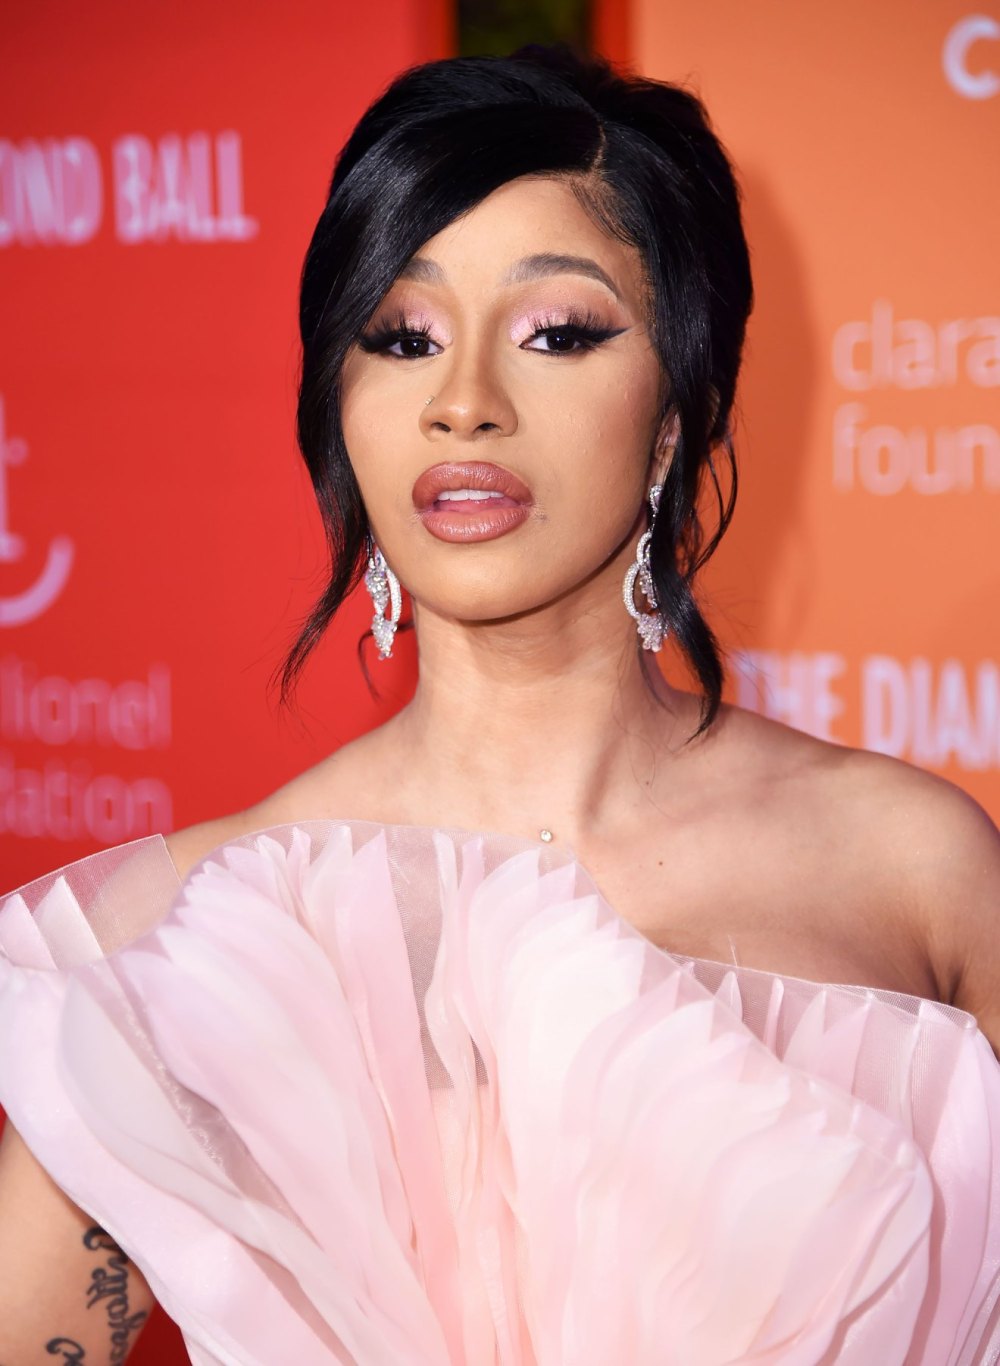 Cardi B Shares Footage of Herself Getting Chest Piercings: Watch